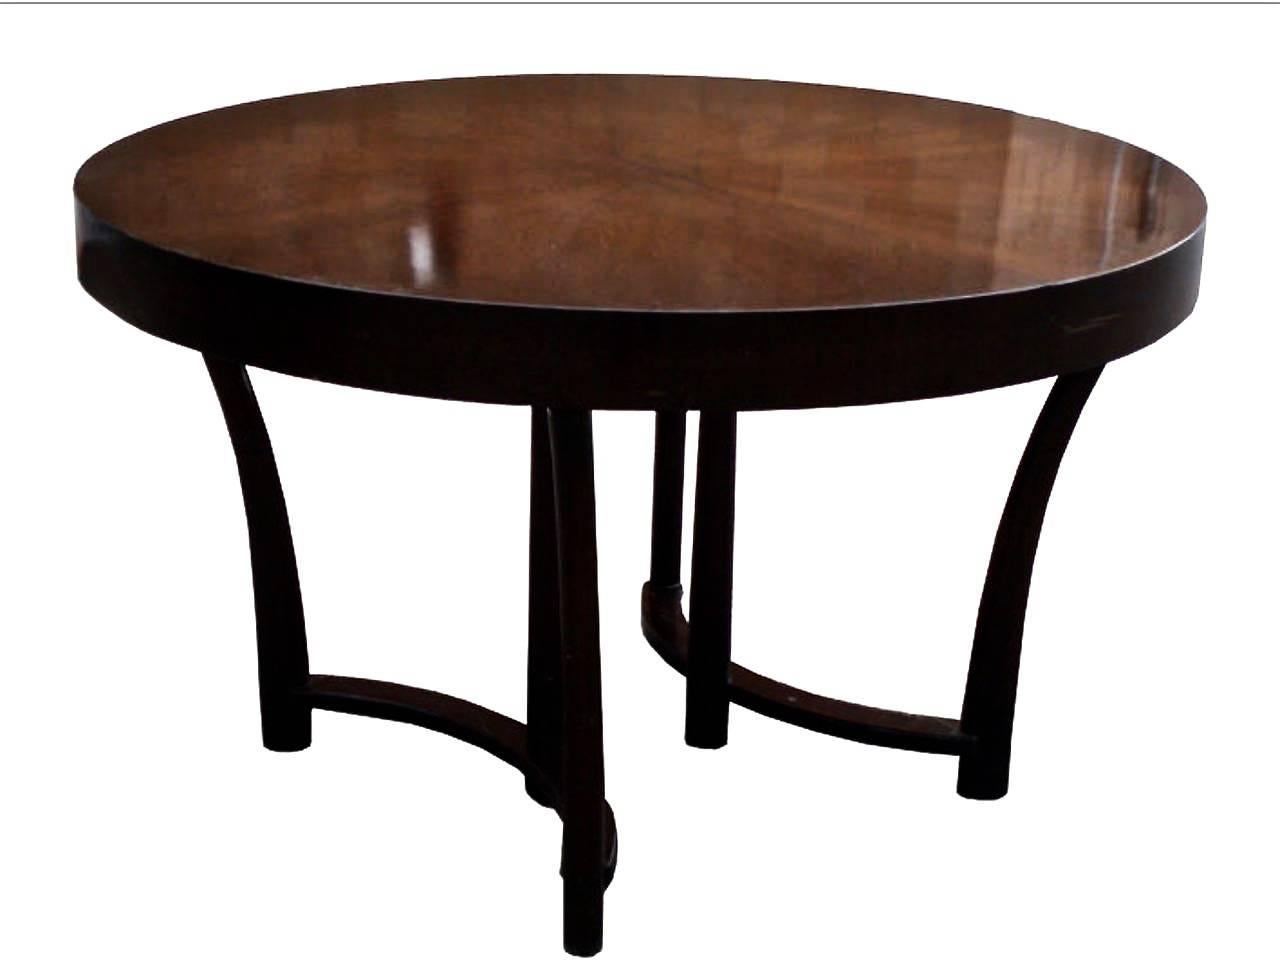 Magnificently refinished walnut dining table with rare starburst veneer top and three extension leaves, by Widdicomb, USA, circa 1950s. This table can be transformed from round to elongated oval by the addition of one, two or three additional